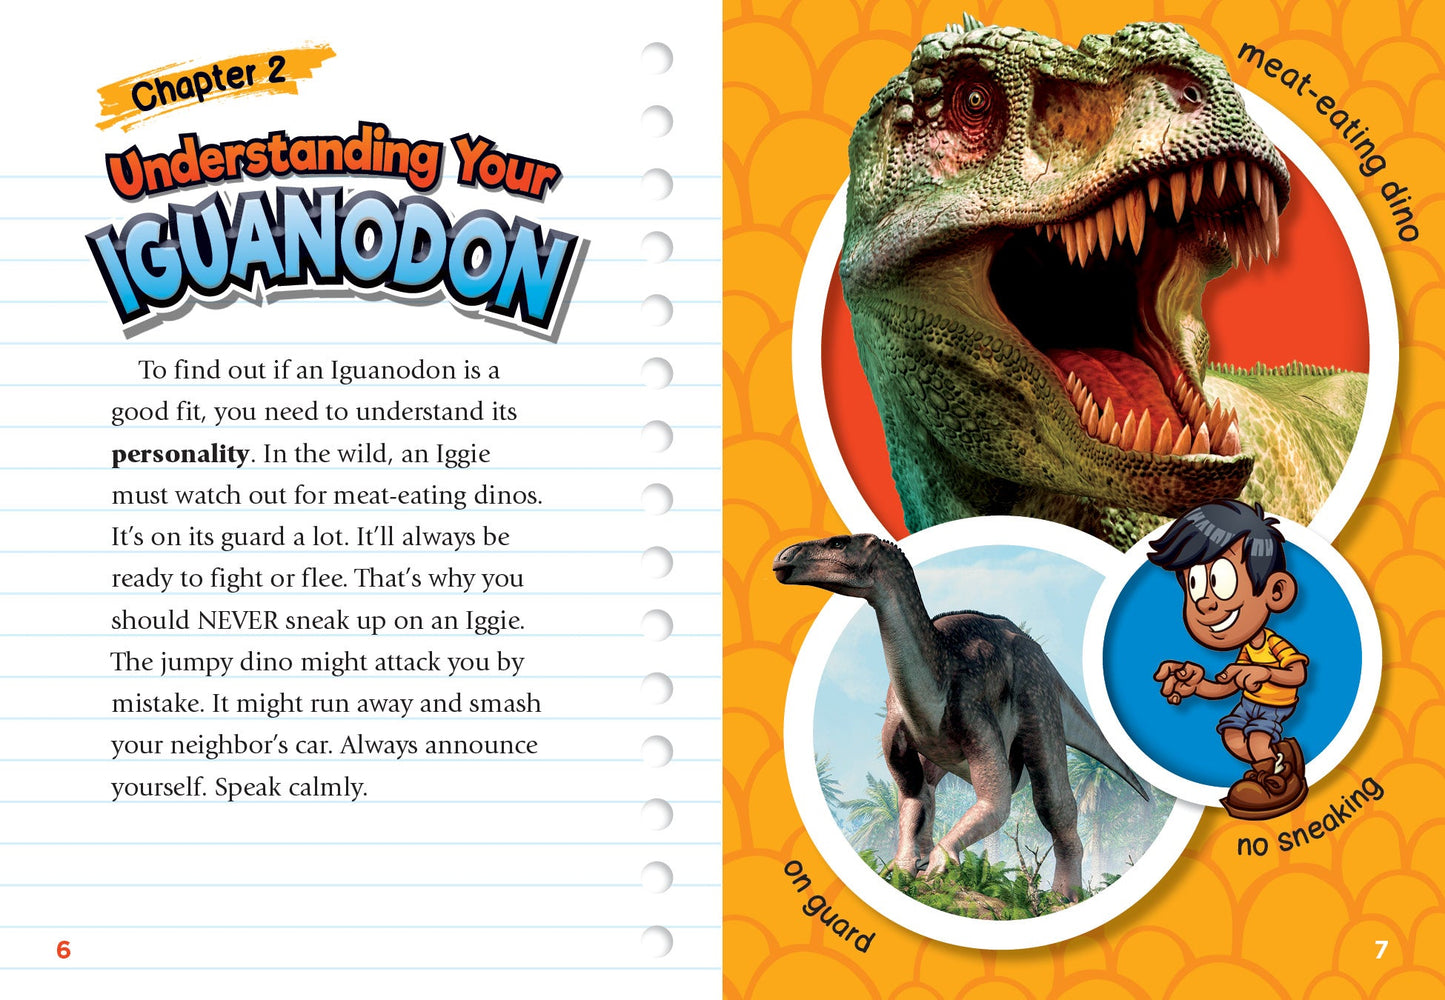 Caring for Your Pet Dinosaur: Taking Care of Your Iguanodon